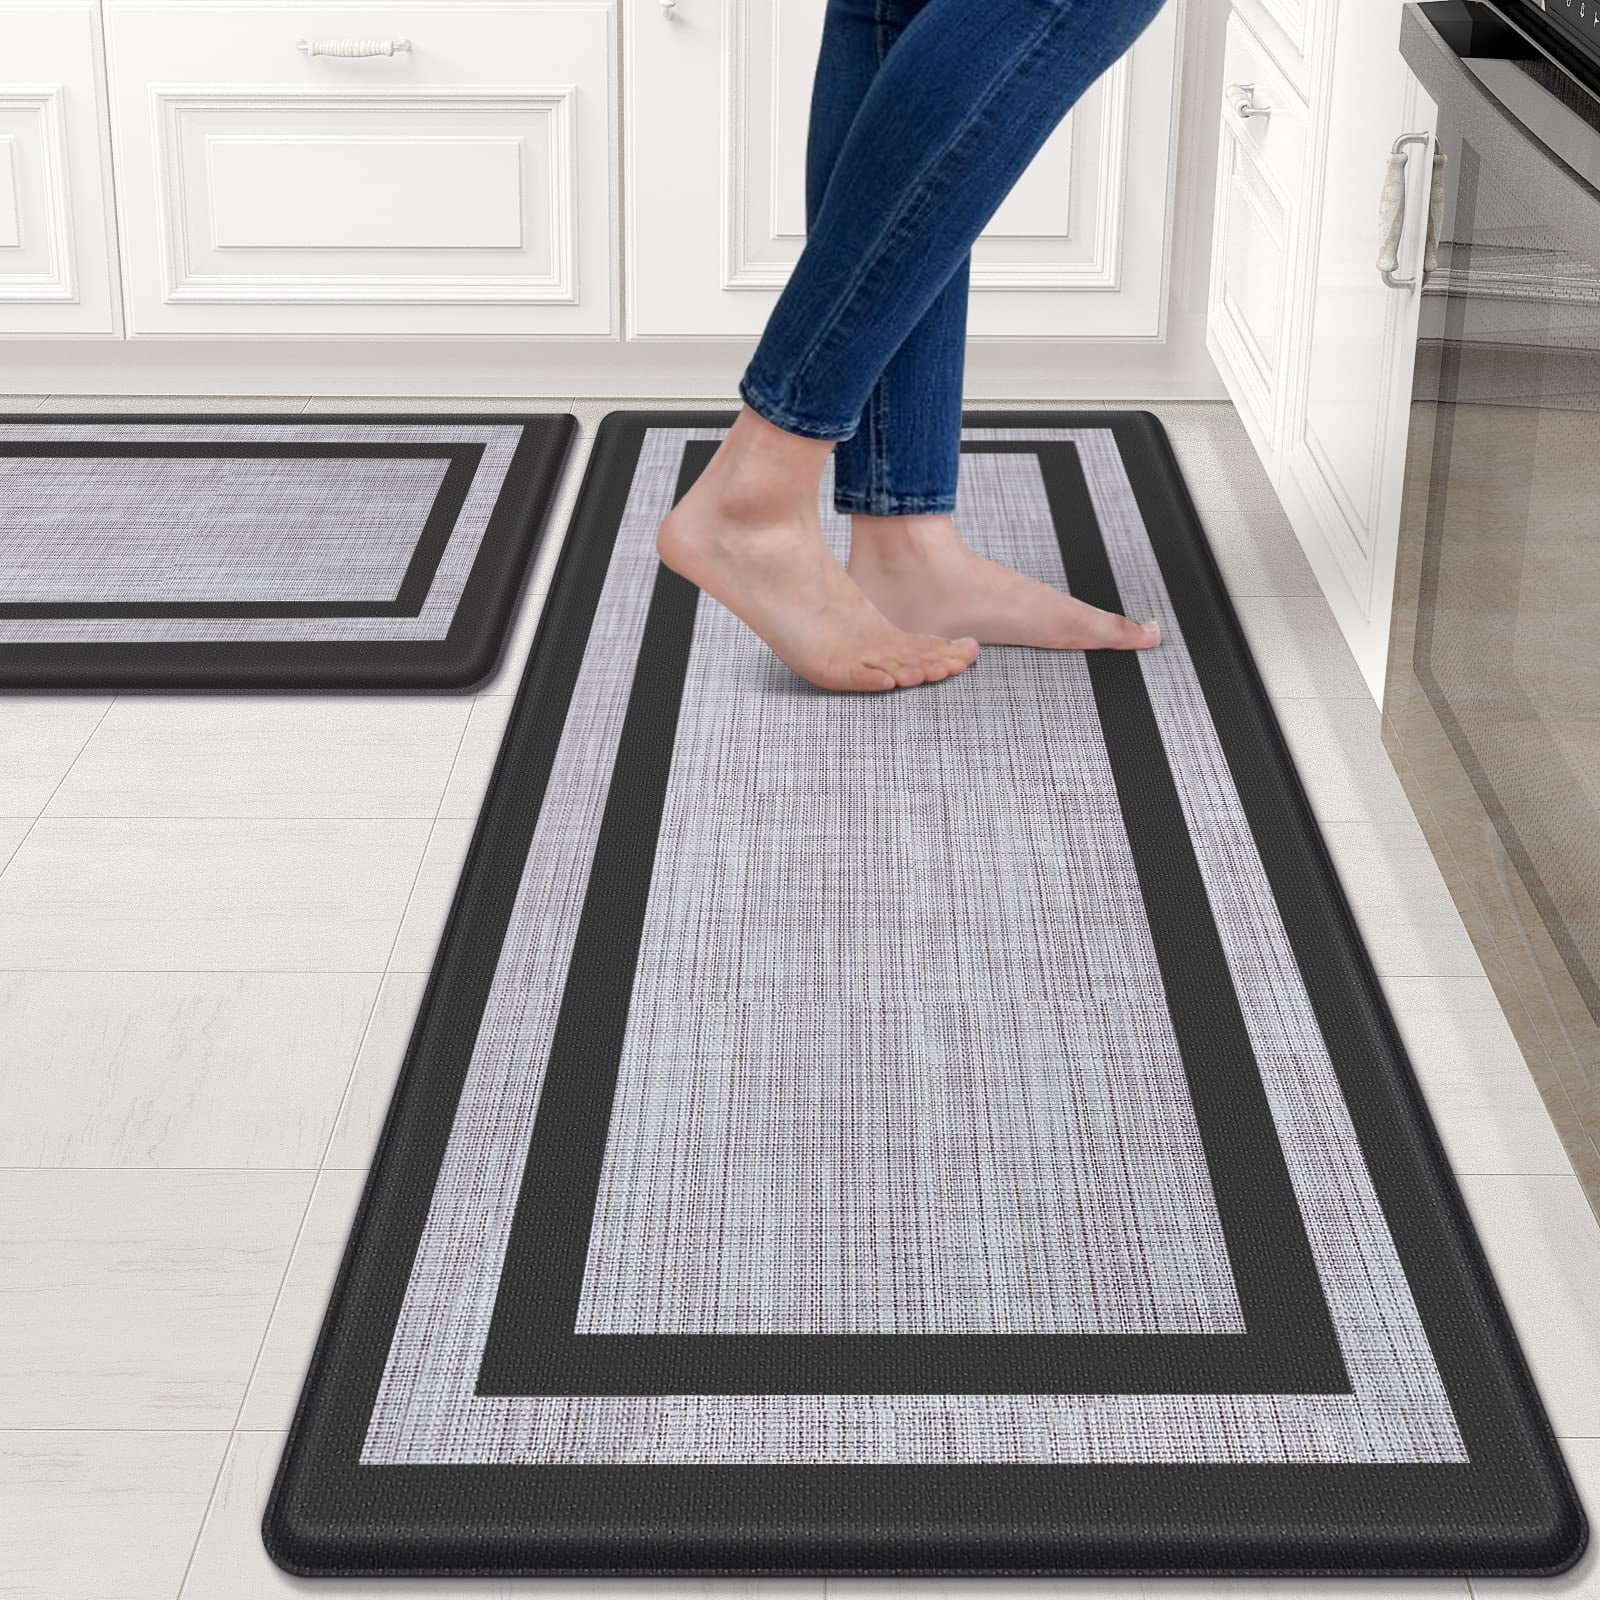  Zenovaire Kitchen Mats Anti Fatigue Brown Kitchen Rugs  Cushioned Floor Mat Waterproof Standing Mat Non Slip Modern Kitchen Rugs  and Mats for Office, Bedroom, Sink, Laundry, 17x60: Home & Kitchen